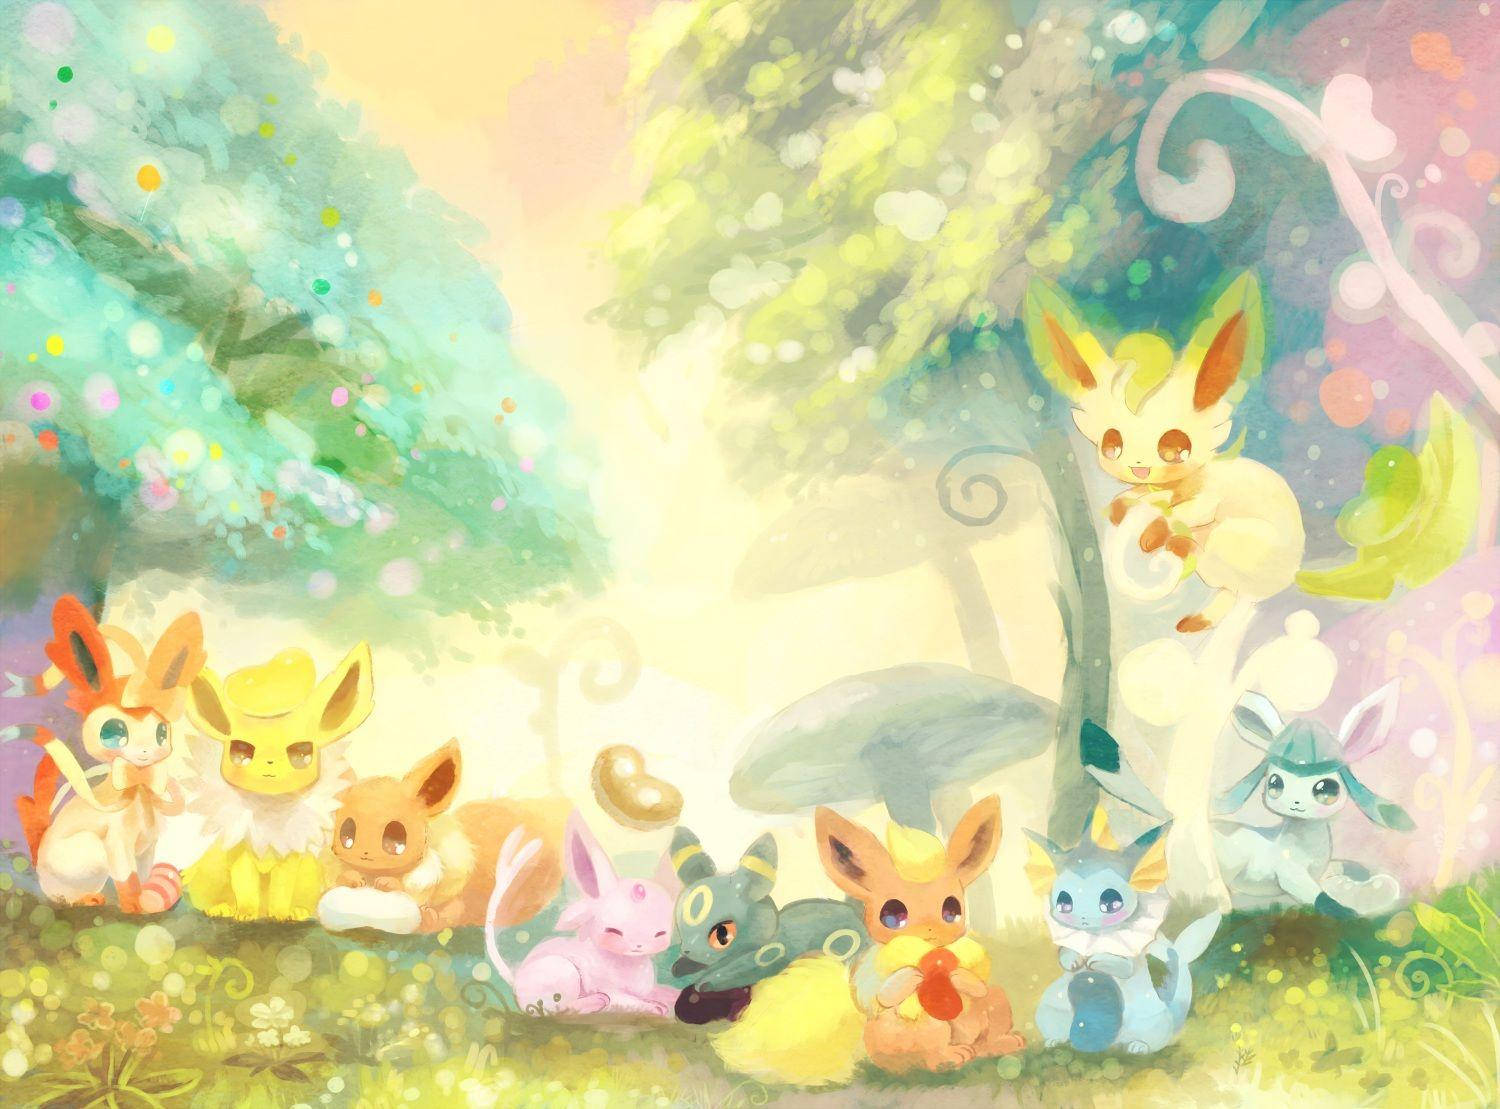 Cute And Endearing Flareon With Other Pokemon Wallpaper